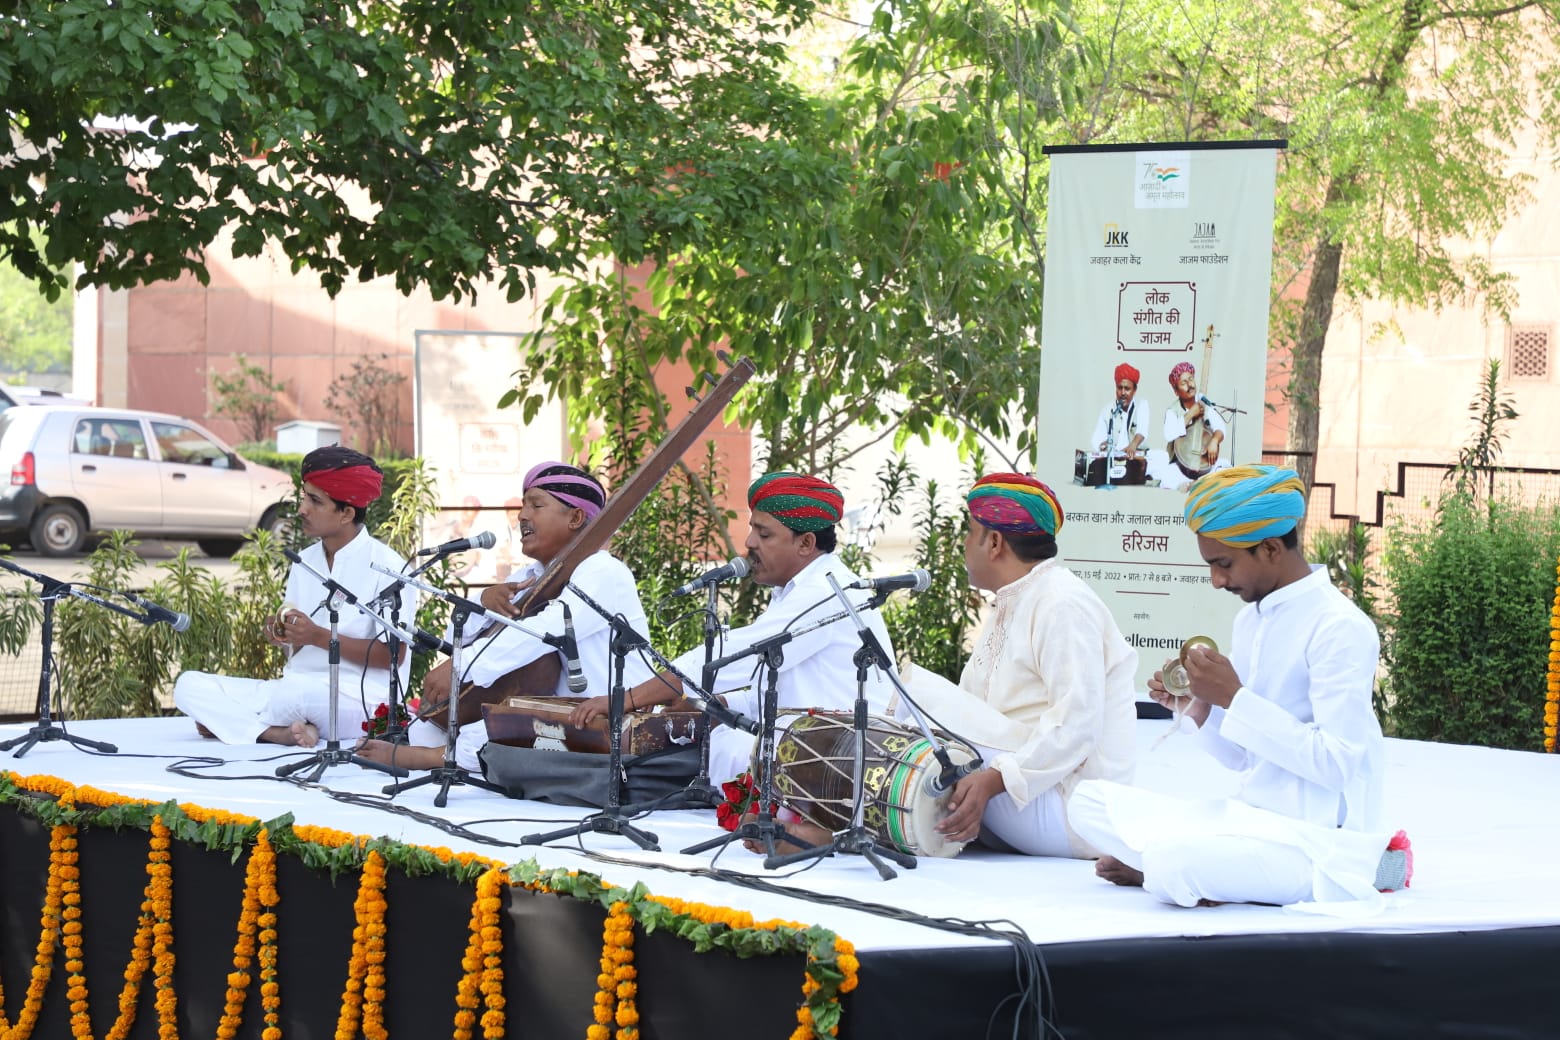 The melodious performance of folk music at JKK enthralled the audience